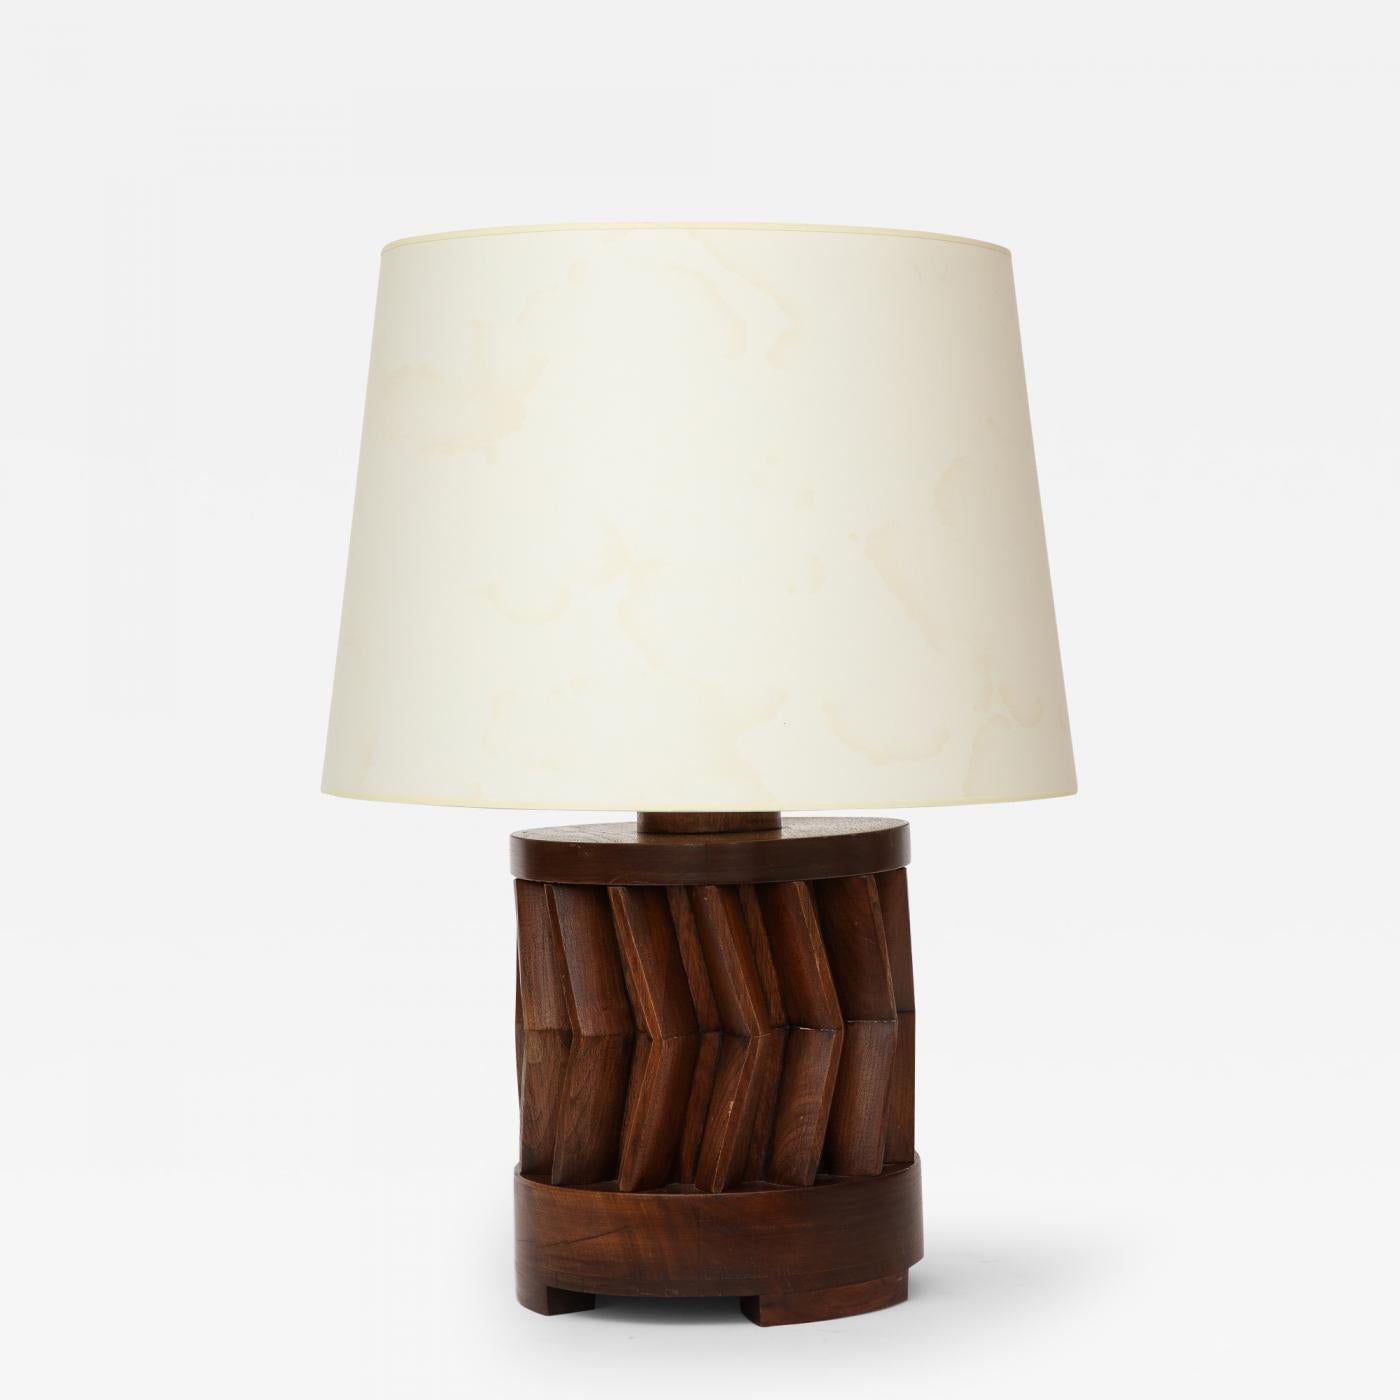 Unique Hand-Made American Walnut Table Lamp, United States, c. 1950

Unique looking table lamp with cool, handmade details.

Additional Information:
Materials: American Walnut, Aged Brass Hardware
Origin: United States
Period: 1950-1979
Creation